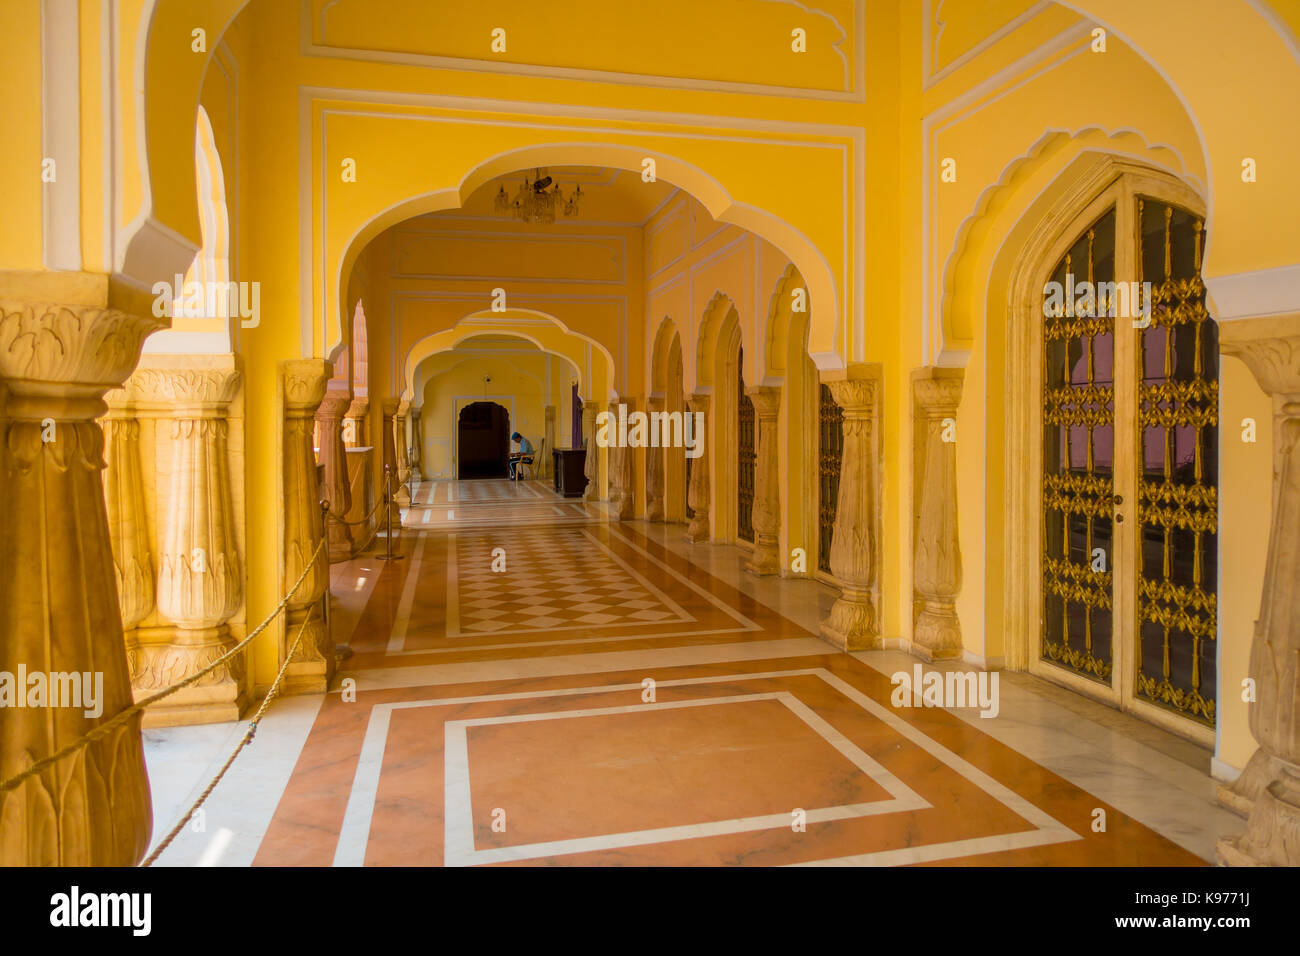 JAIPUR, INDIA - SEPTEMBER 19, 2017: Indoor view of Chandra Mahal museum, City Palace in Jaipur Stock Photo